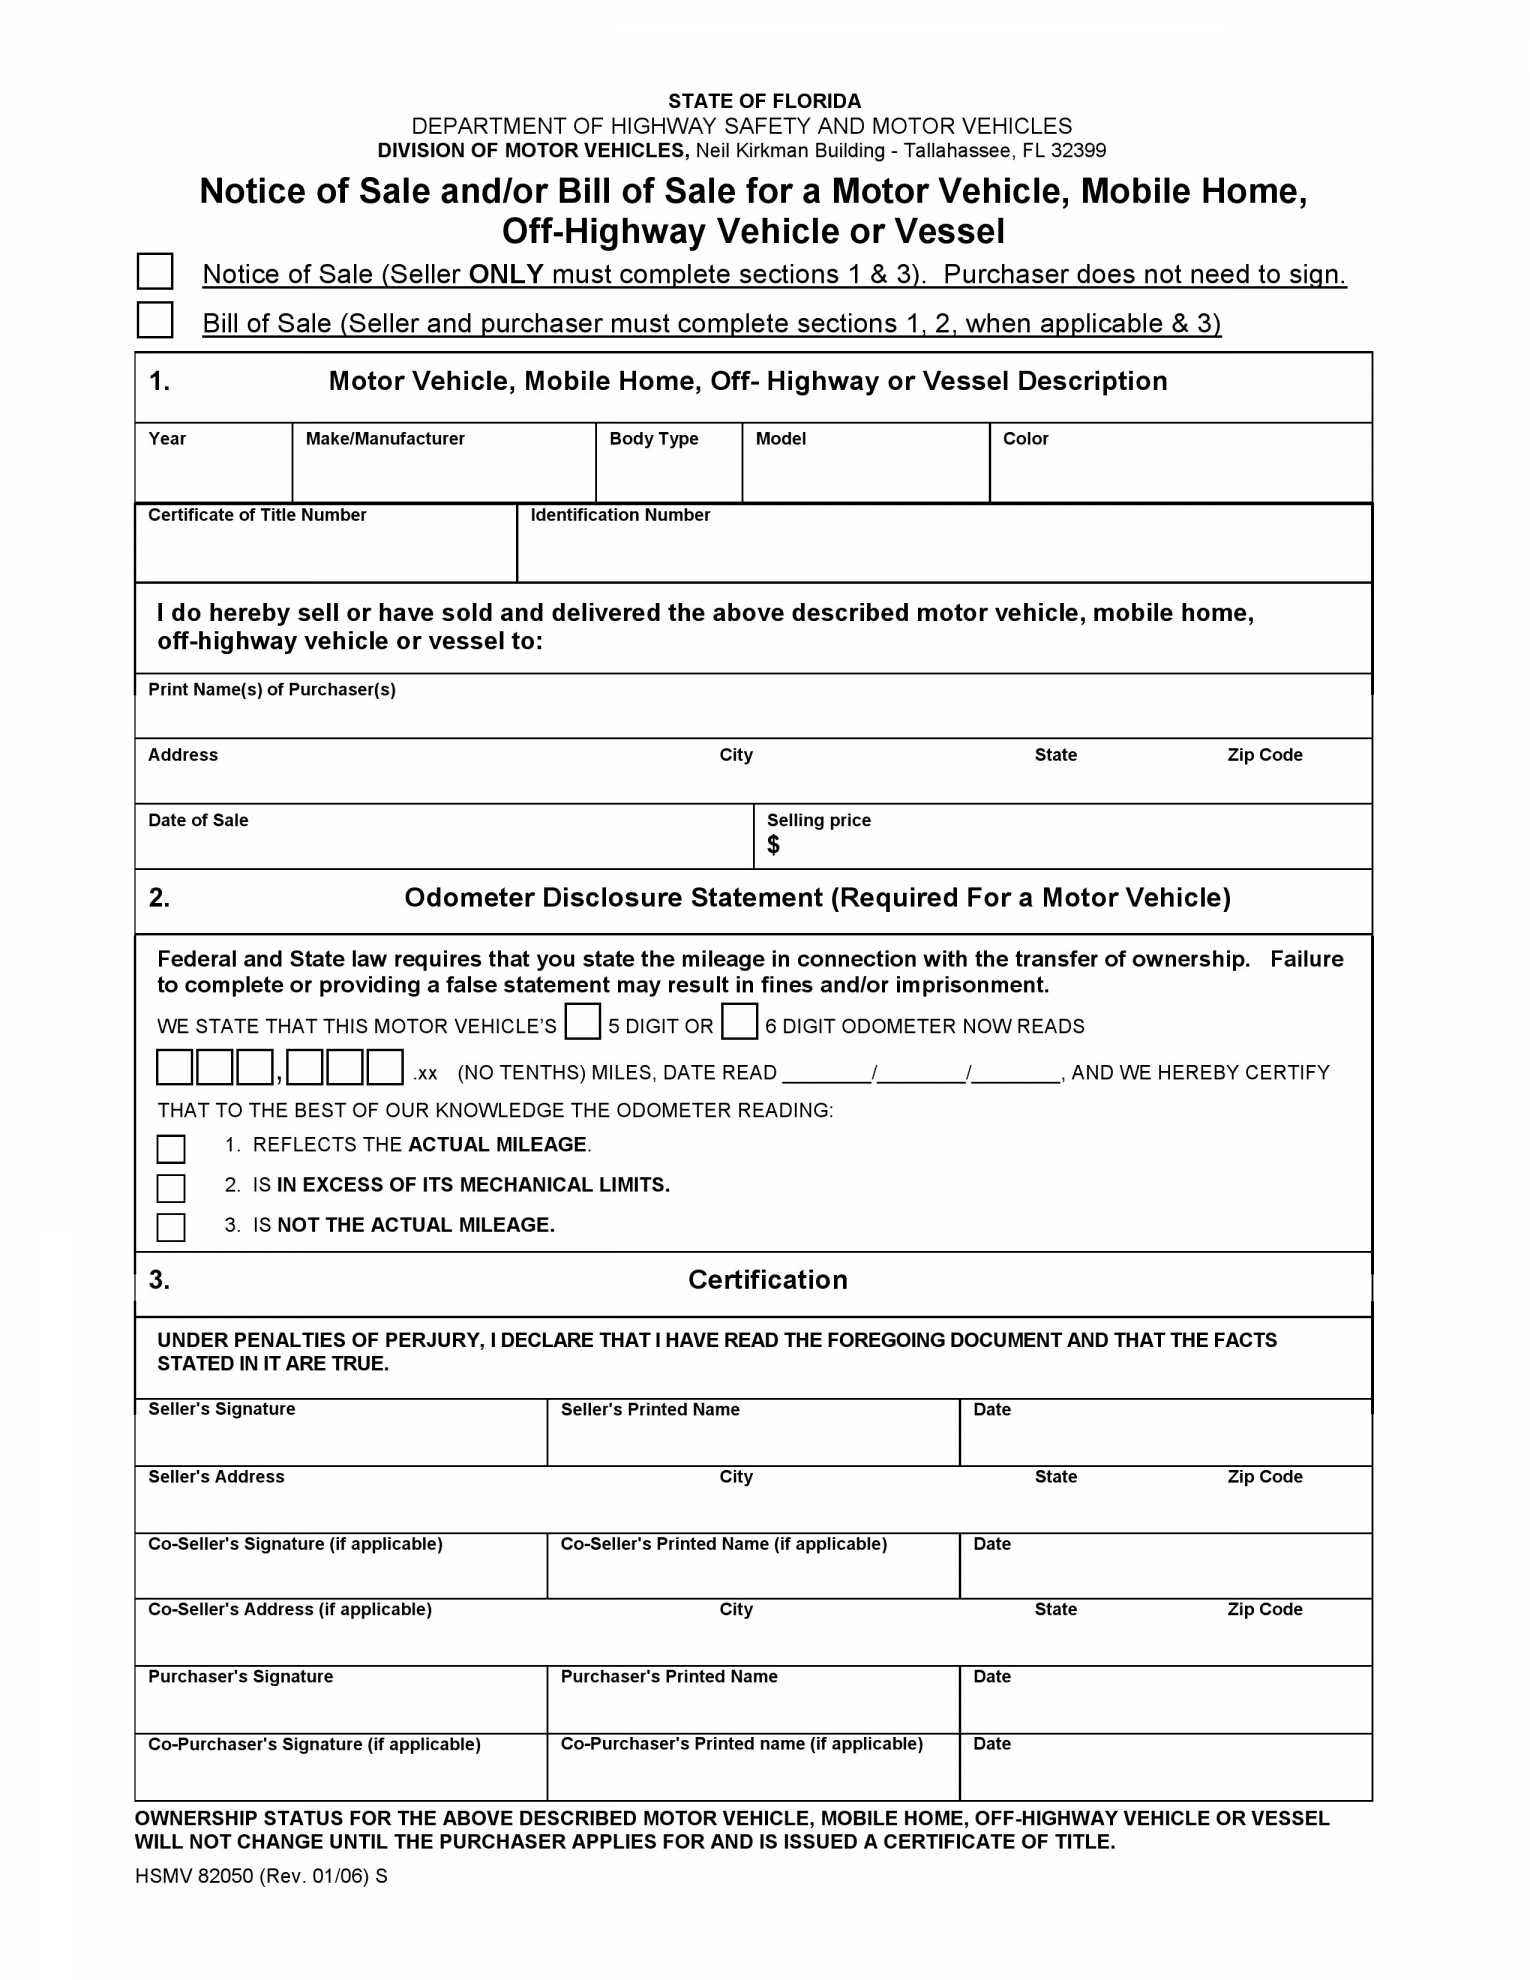 Free Printable Bill Of Sale Form For Mobile Home And Bill Of Sale - Free Printable Mobile Home Bill Of Sale